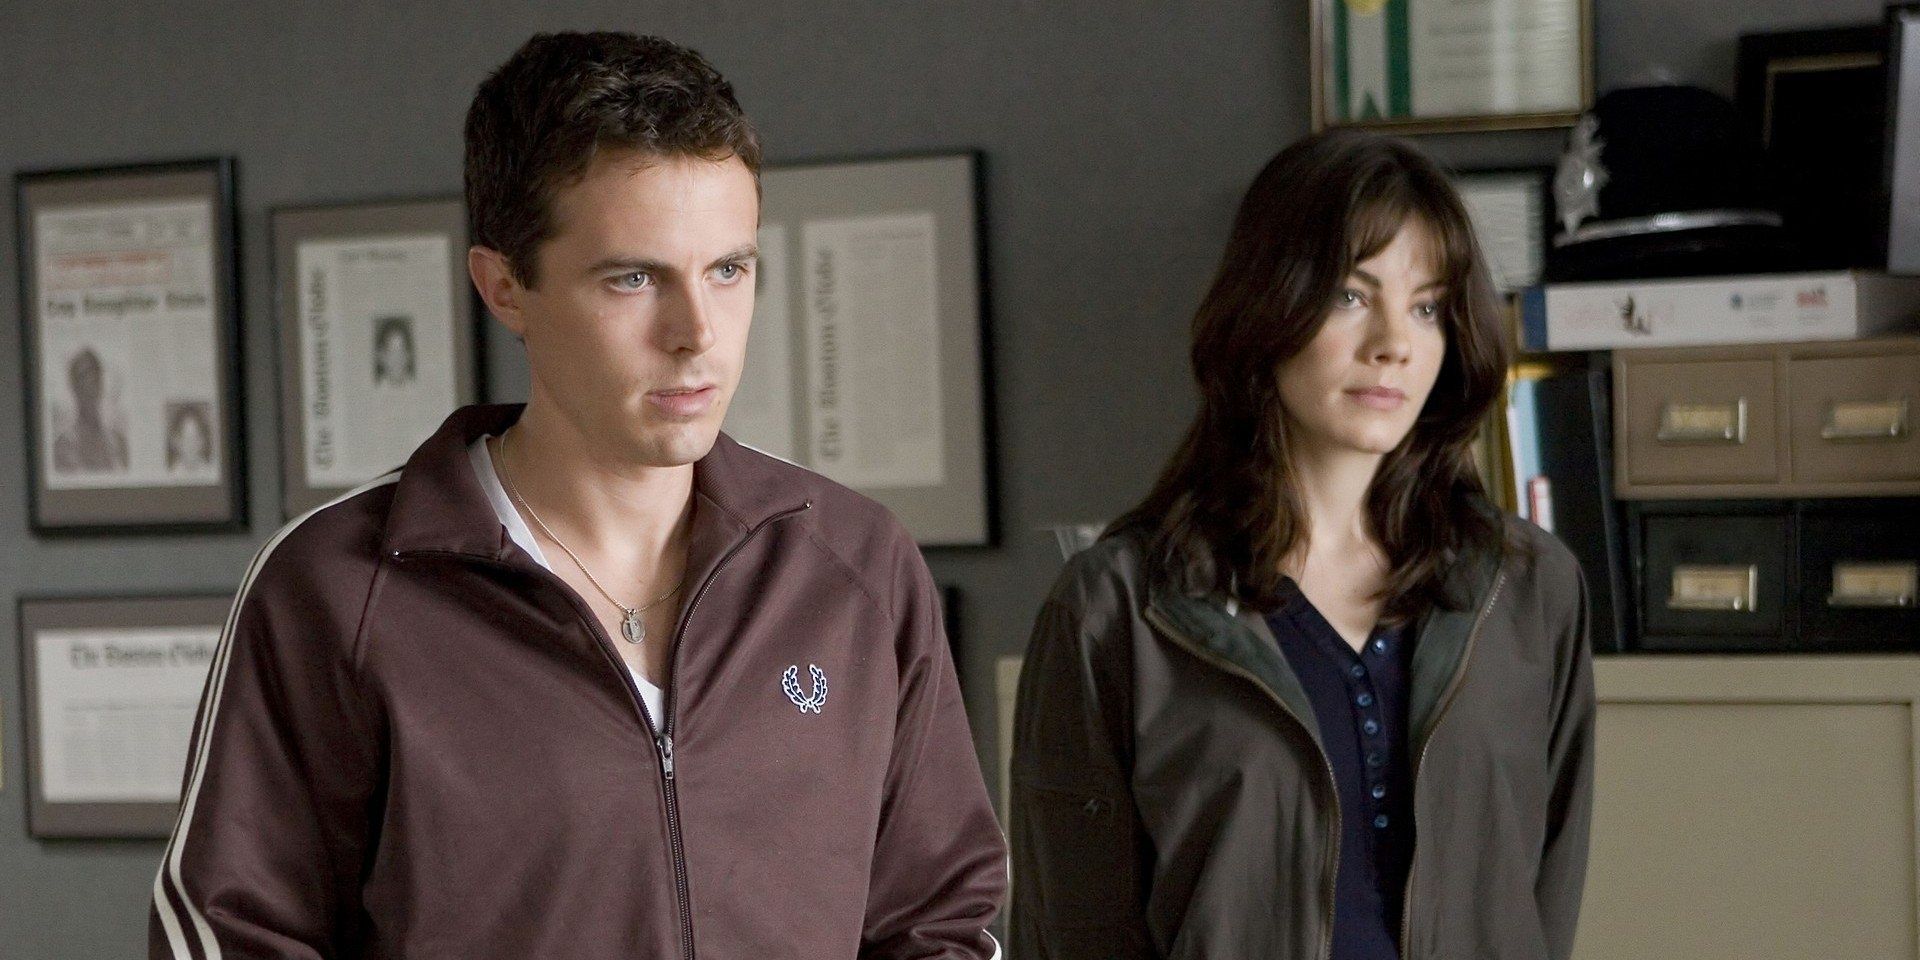 Casey Affleck and Michelle monaghan